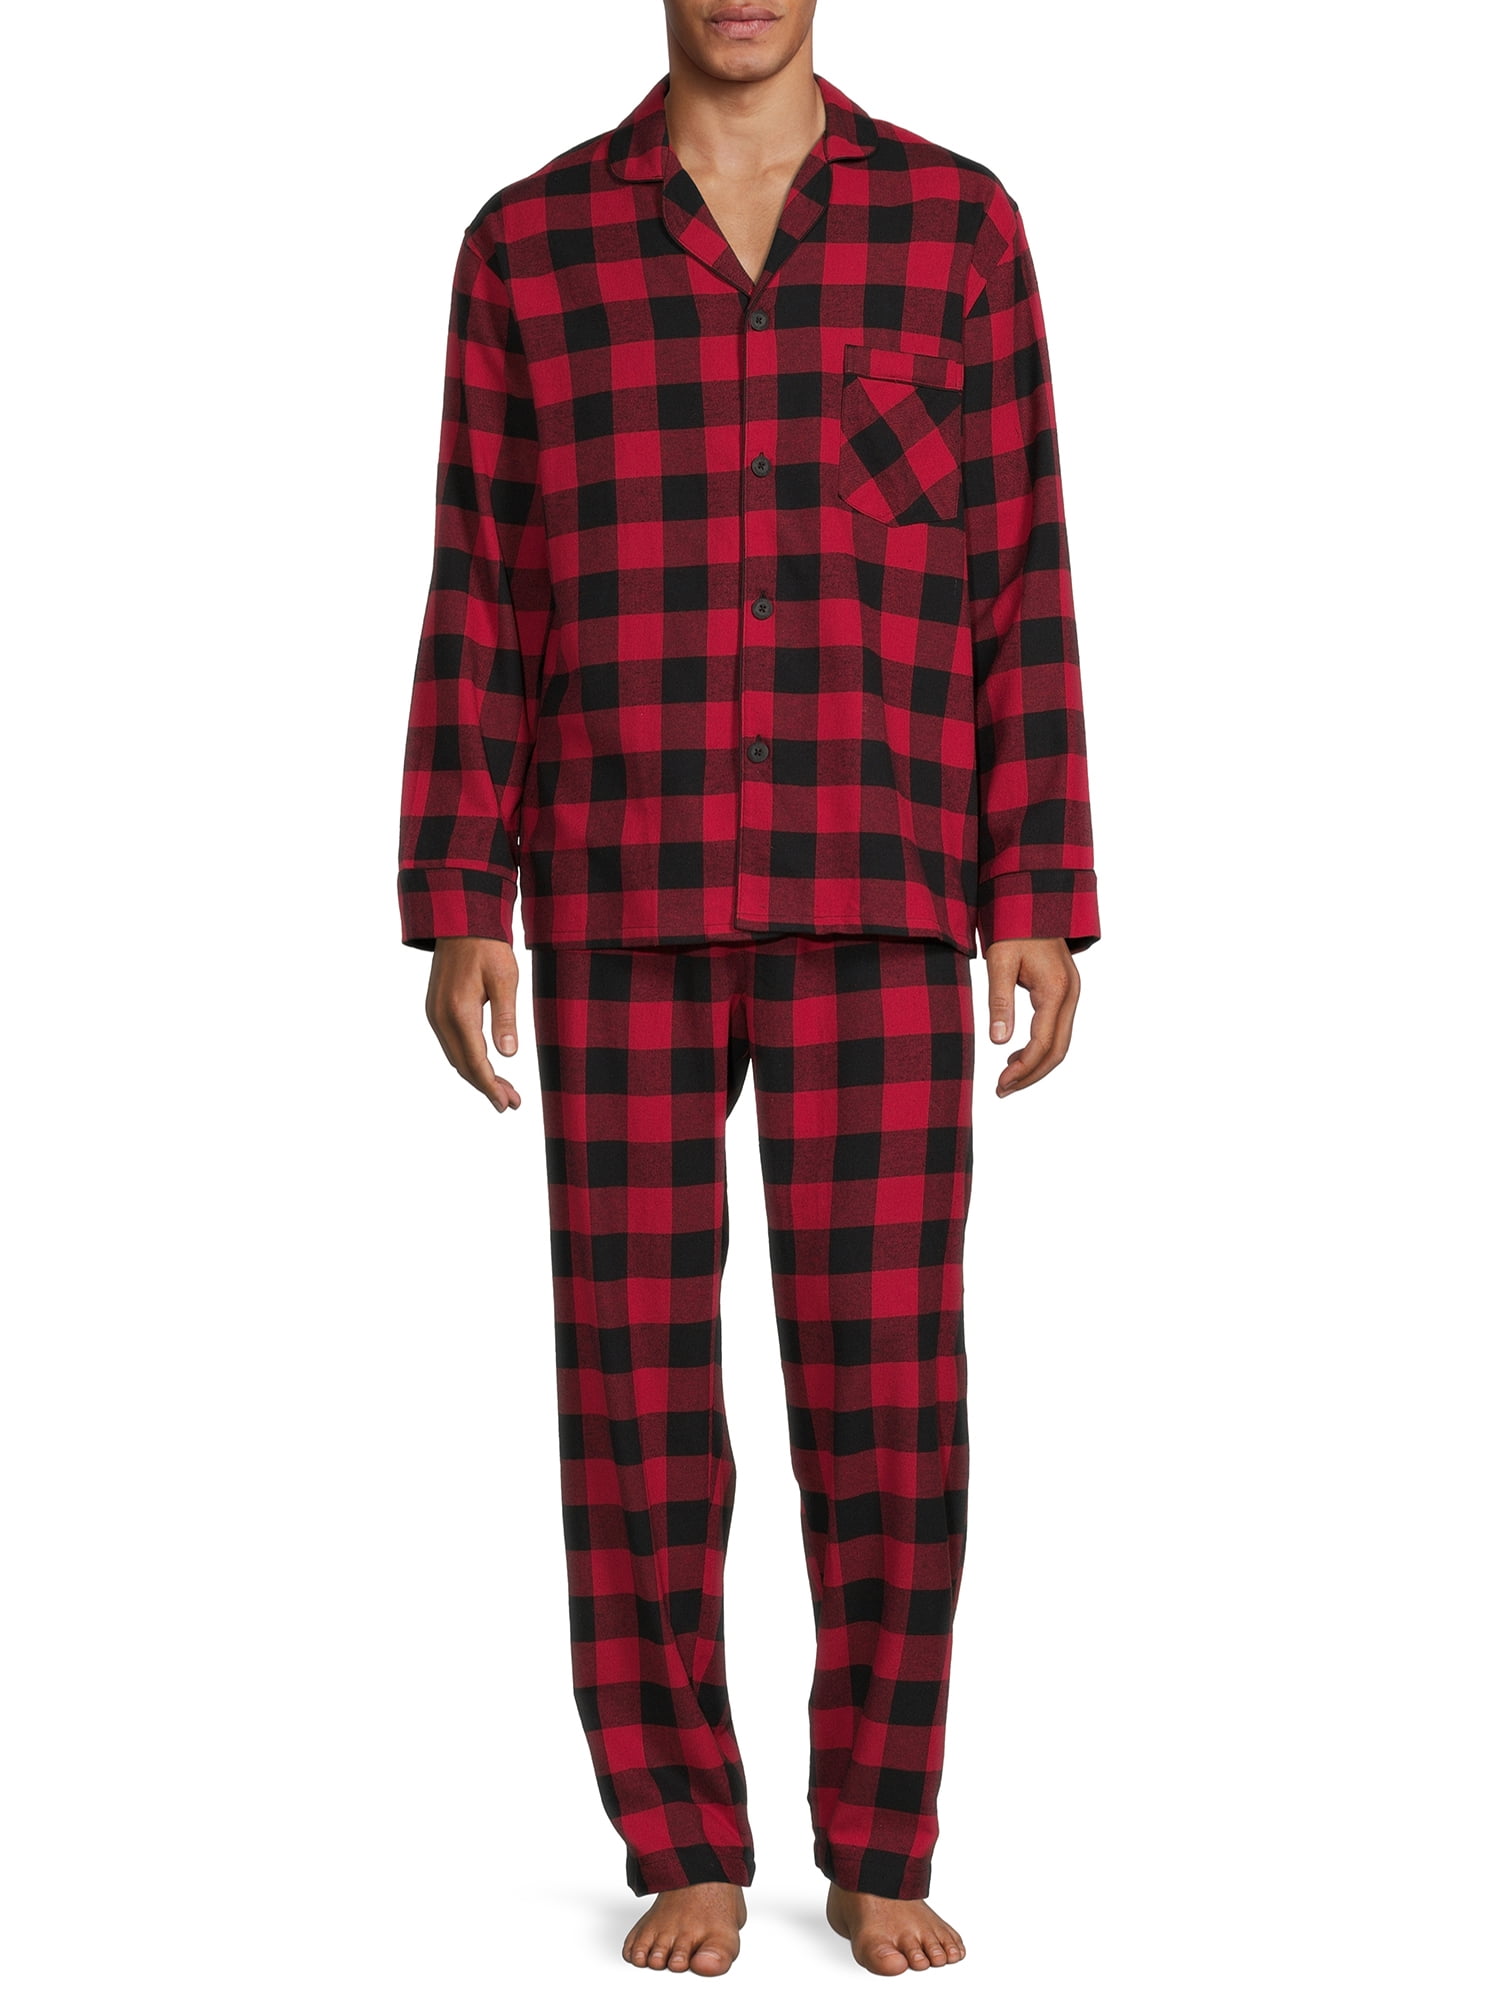 Hanes Men's and Big Men's Cotton Flannel Pajama Set, 2-Piece With Big & Tall Sizing